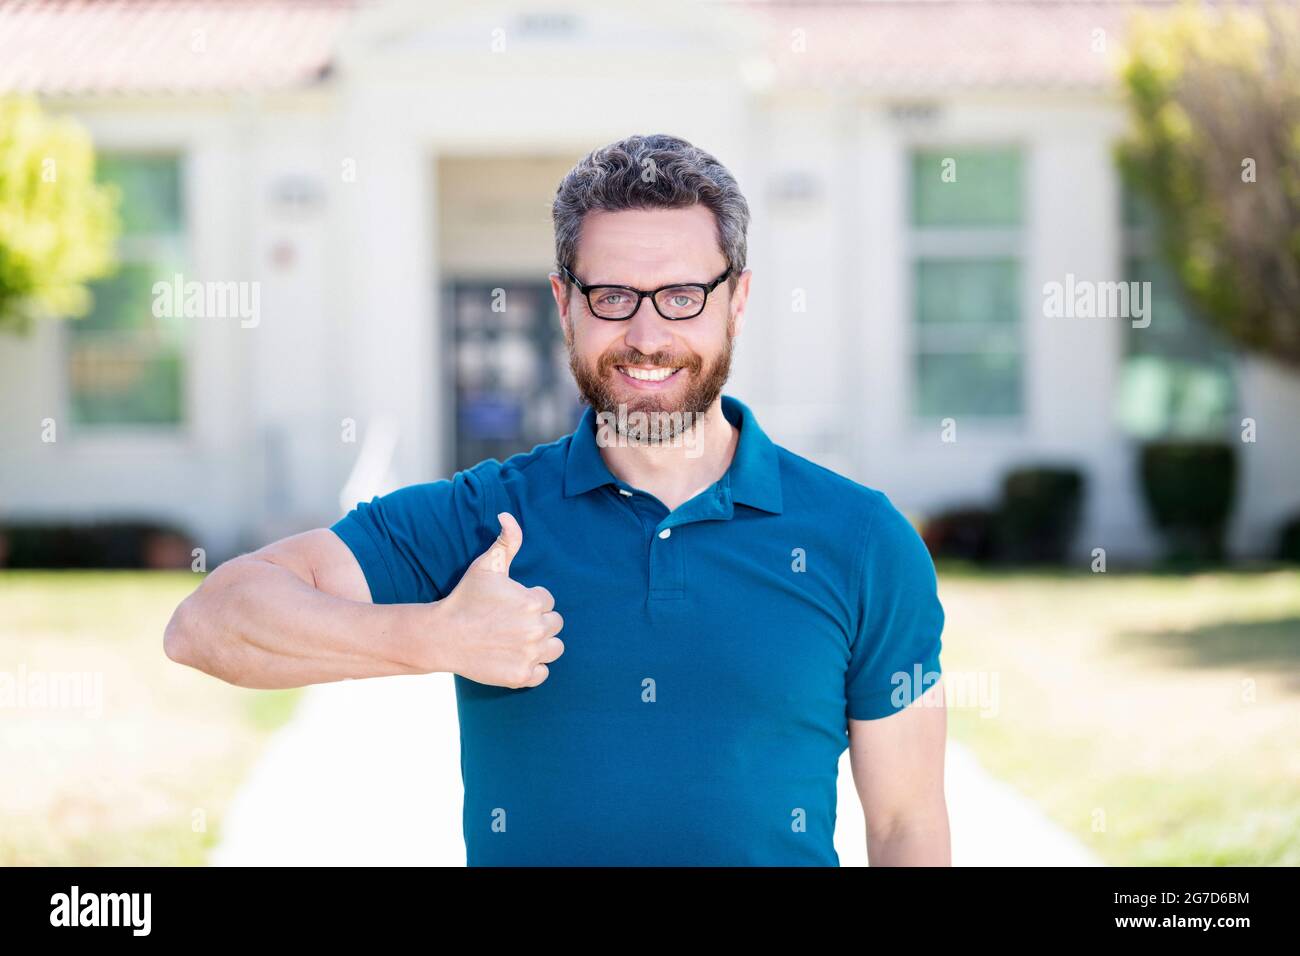 good eye health of happy guy in glasses with thumb up gesture, eye care Stock Photo